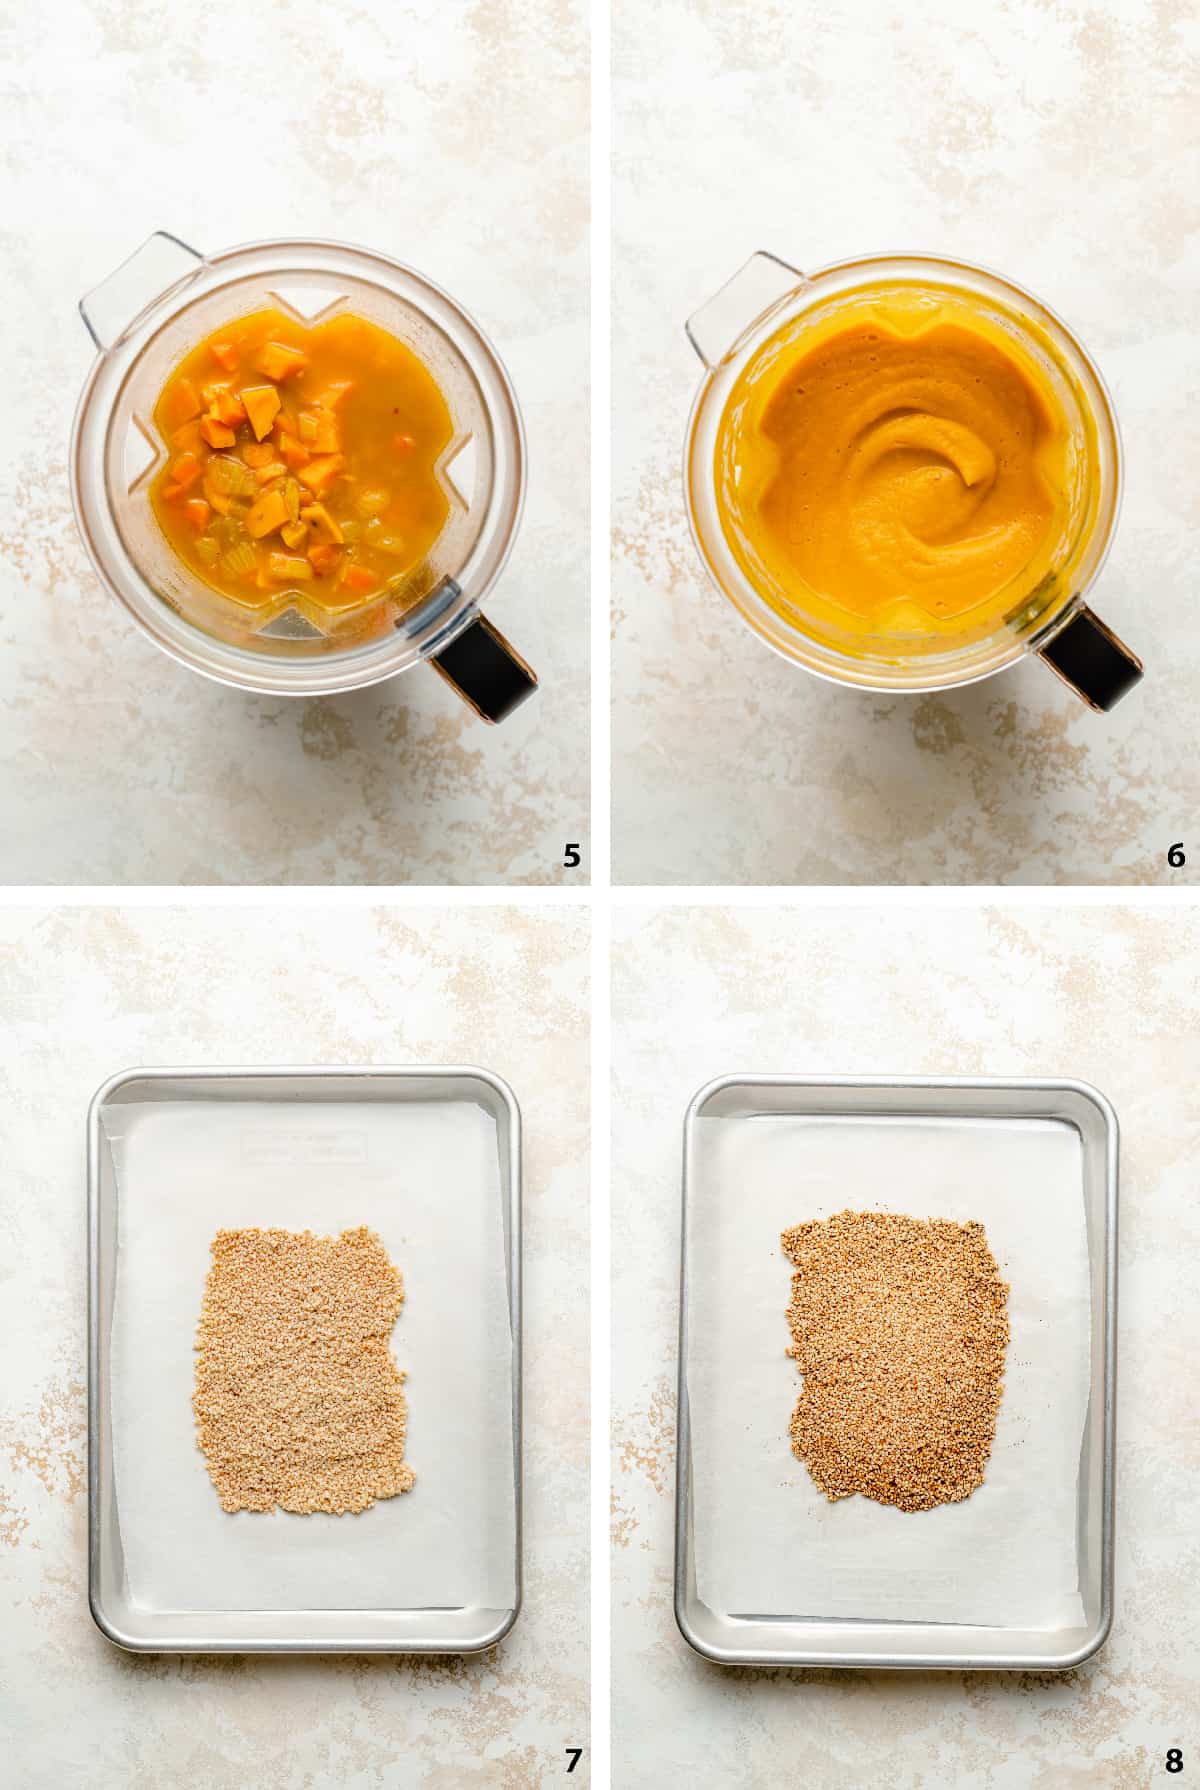 Process steps of soup before and after blending and sesame brittle before and after baking.